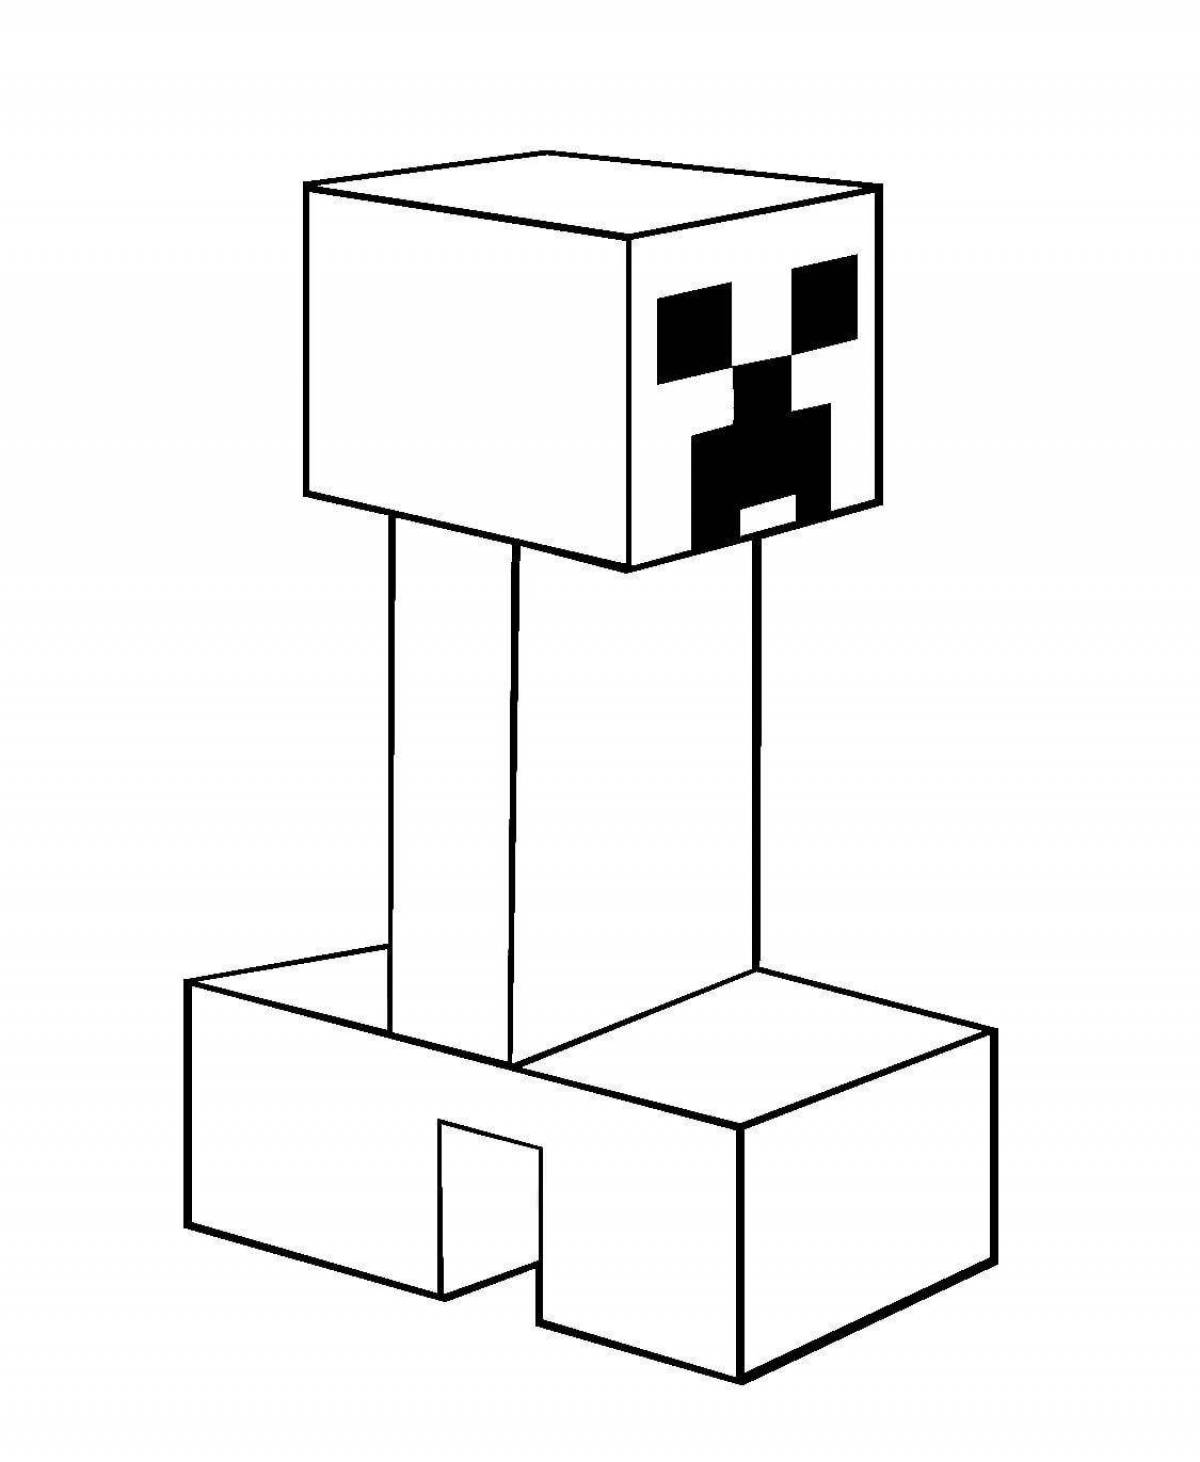 Adorable minecraft hare coloring page